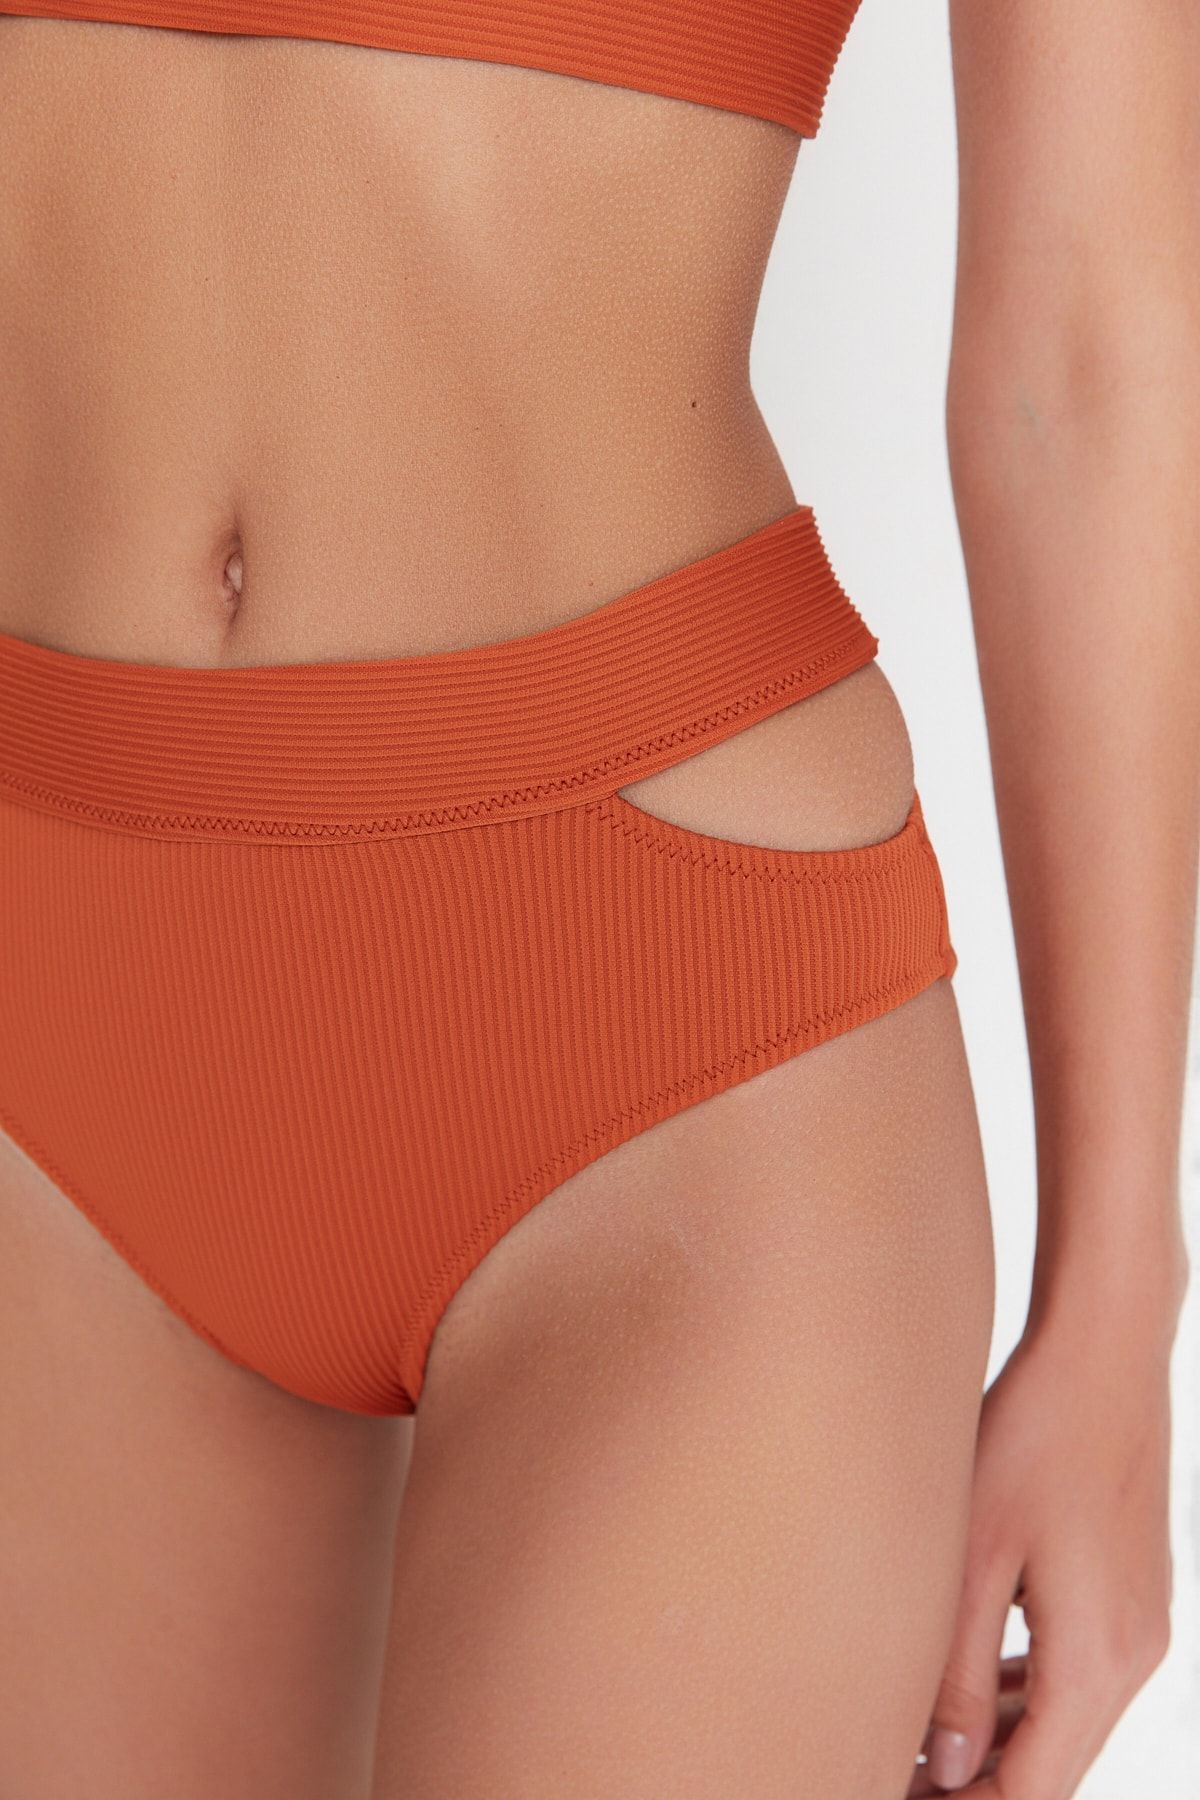 Out From Under Urban Outfitters Laser Cut Thong Panties , Size